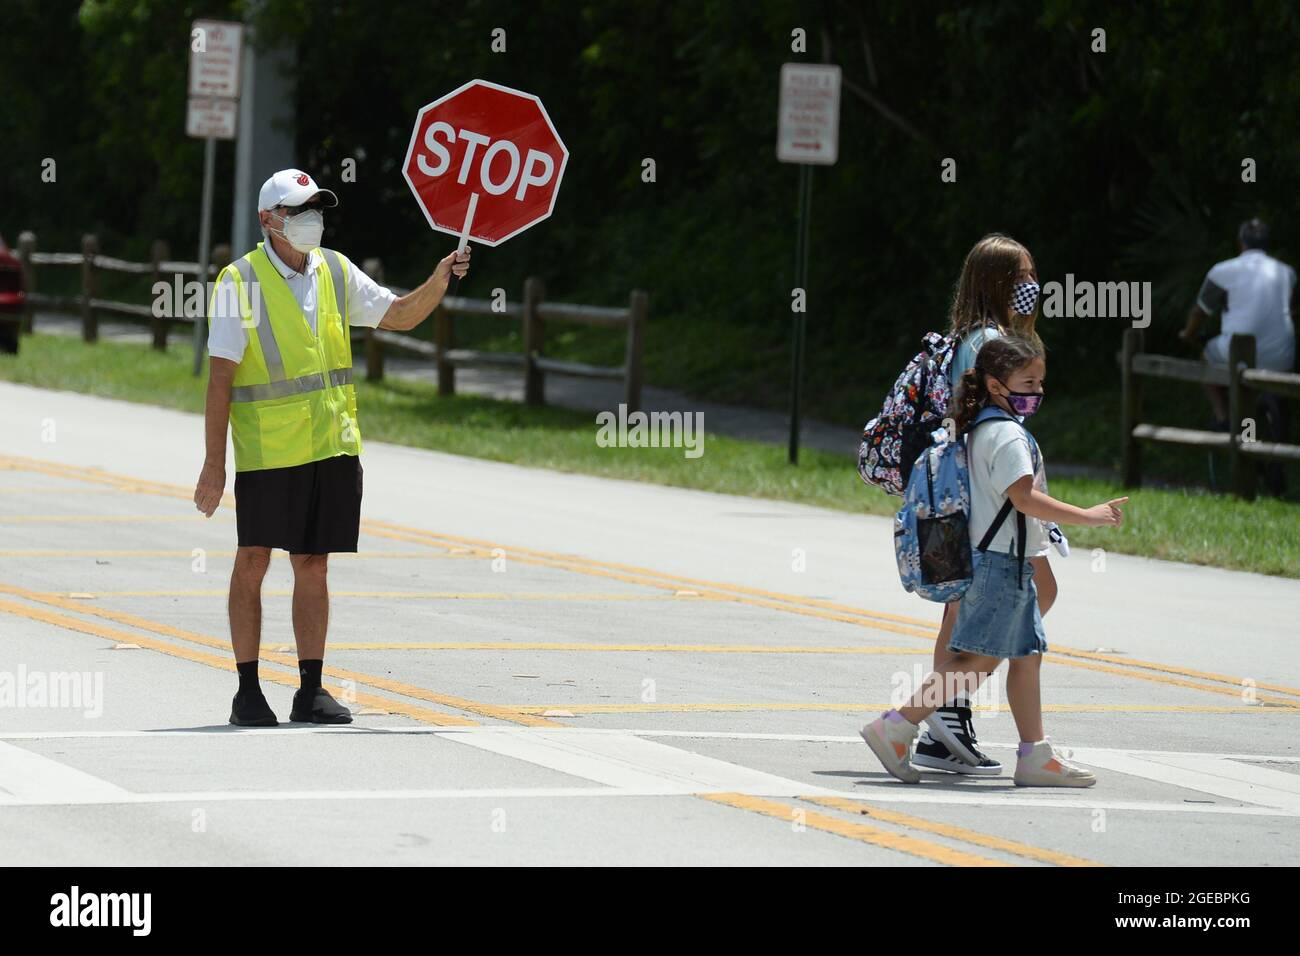 Parkland. 18th Aug, 2021. Parents seen picking up their masked children from Riverglades Elementary School as Public schools open in Broward County Florida as Chairwoman Rosalind Osgood of Broward County School Board had no choice but to defy Gov. Ron DeSantis's ban on mask mandates on August 18, 2021 in Parkland, Florida. Credit: Mpi04/Media Punch/Alamy Live News Stock Photo